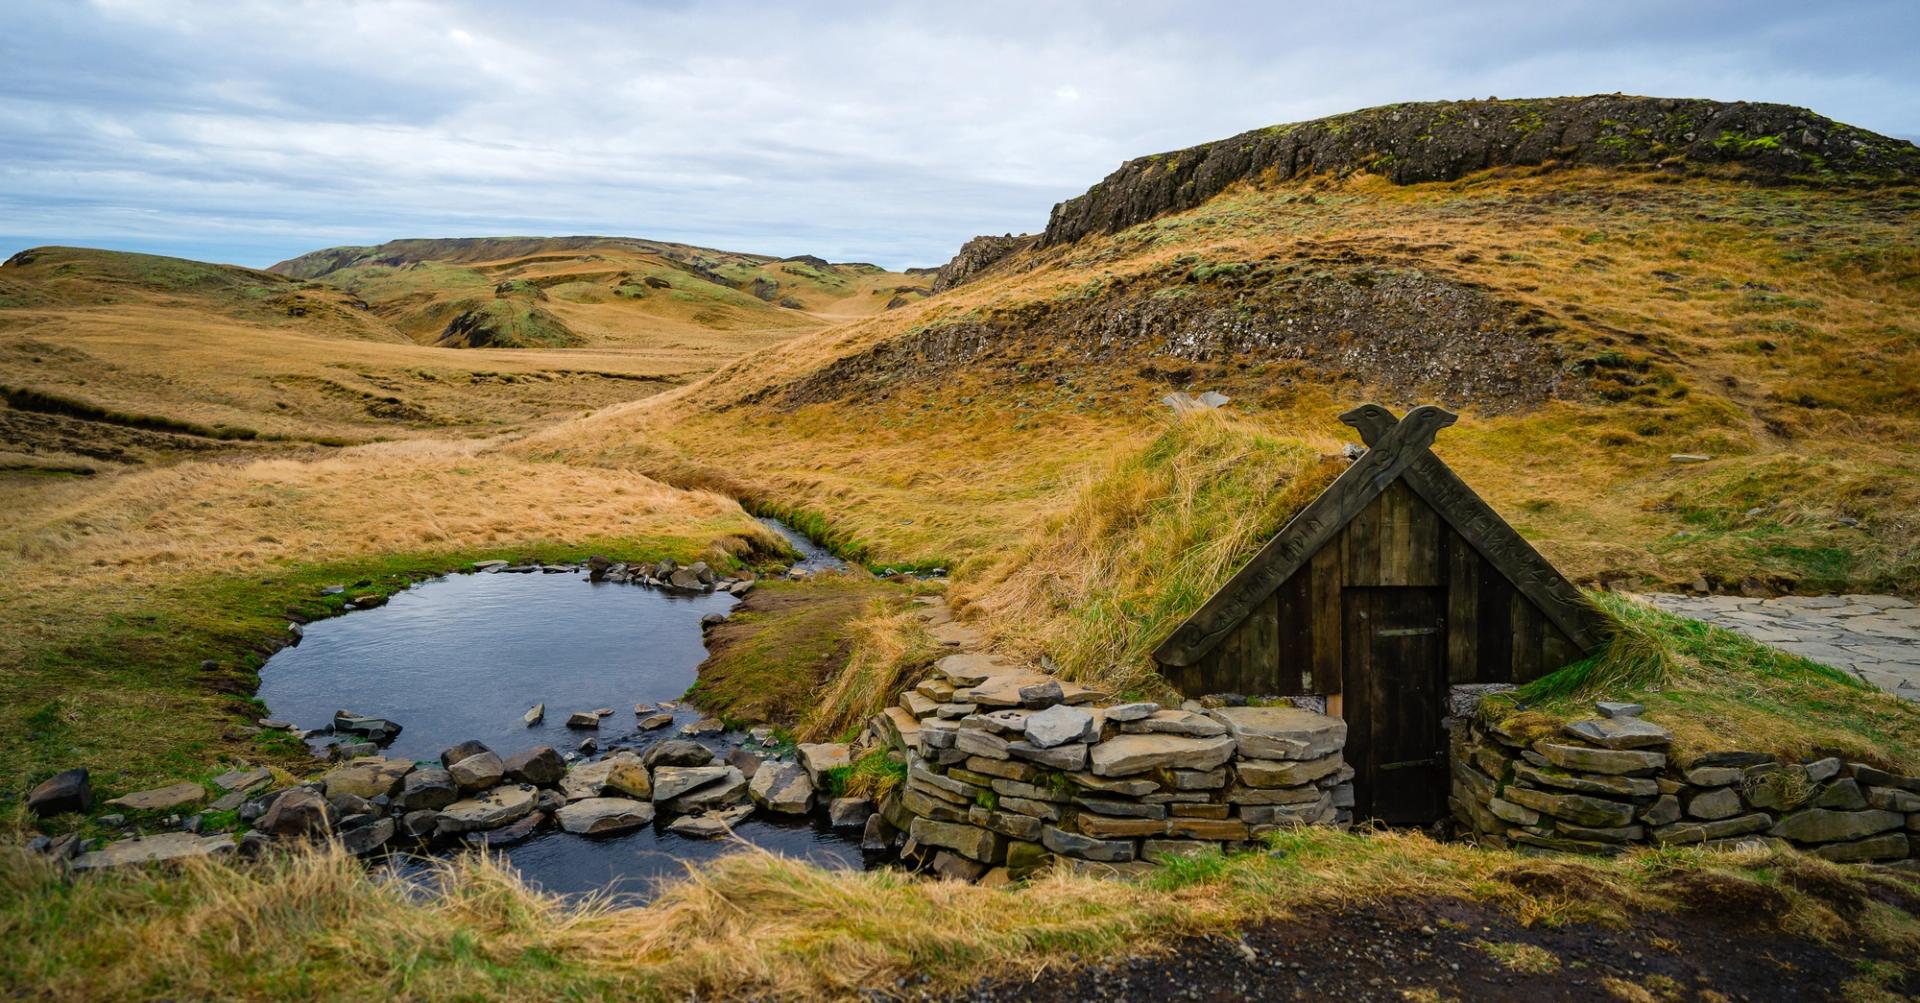 A small hot spring in Iceland with a small turf house next to it. The Hrunalaug Hot Spring.